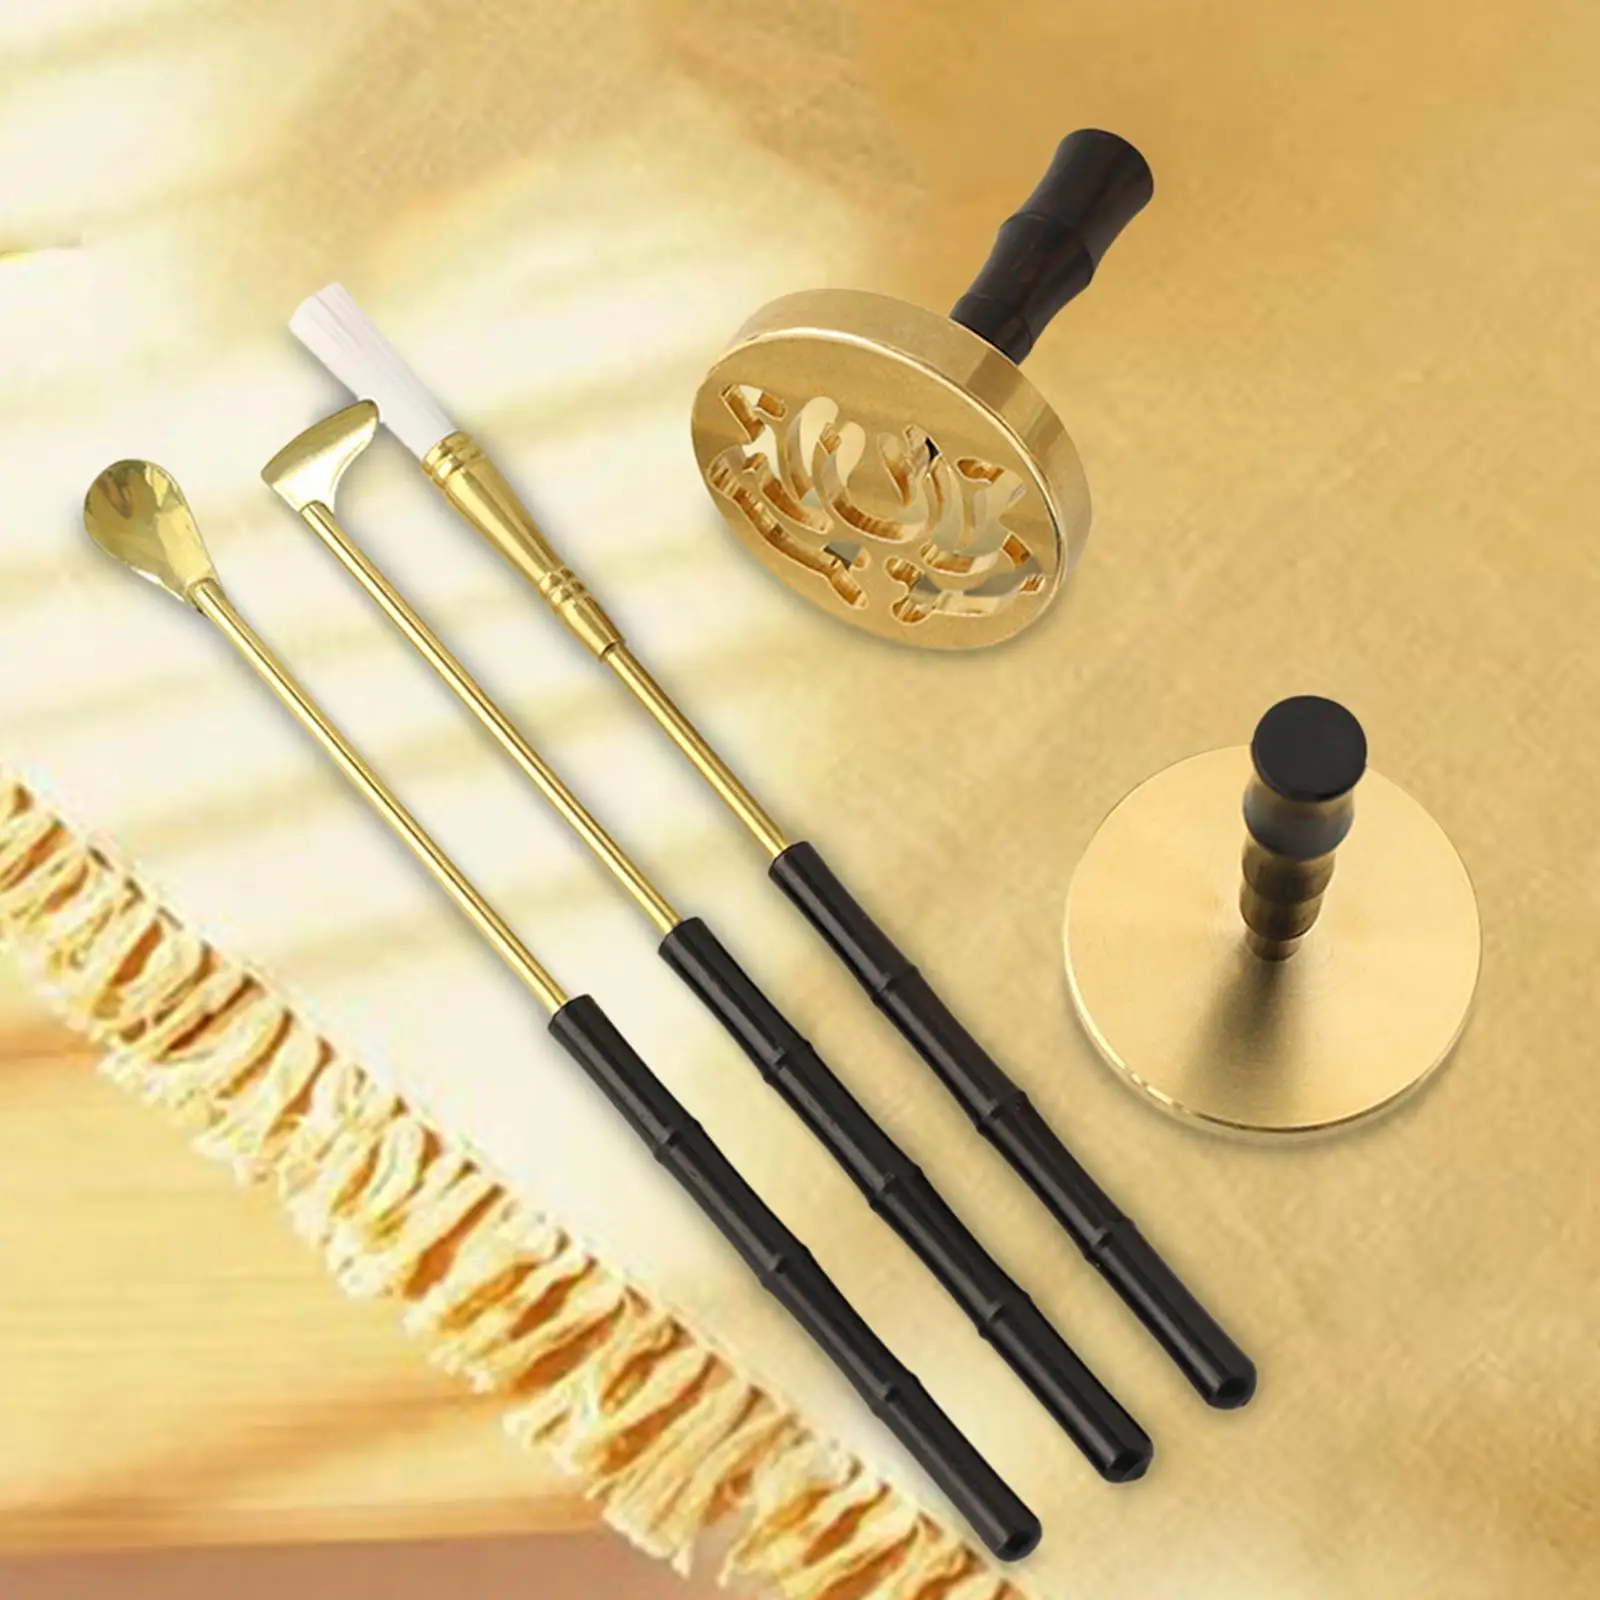 5 Pieces Incense Tool Set Censer Tool Incense Making Spoon for Office Home Supplies